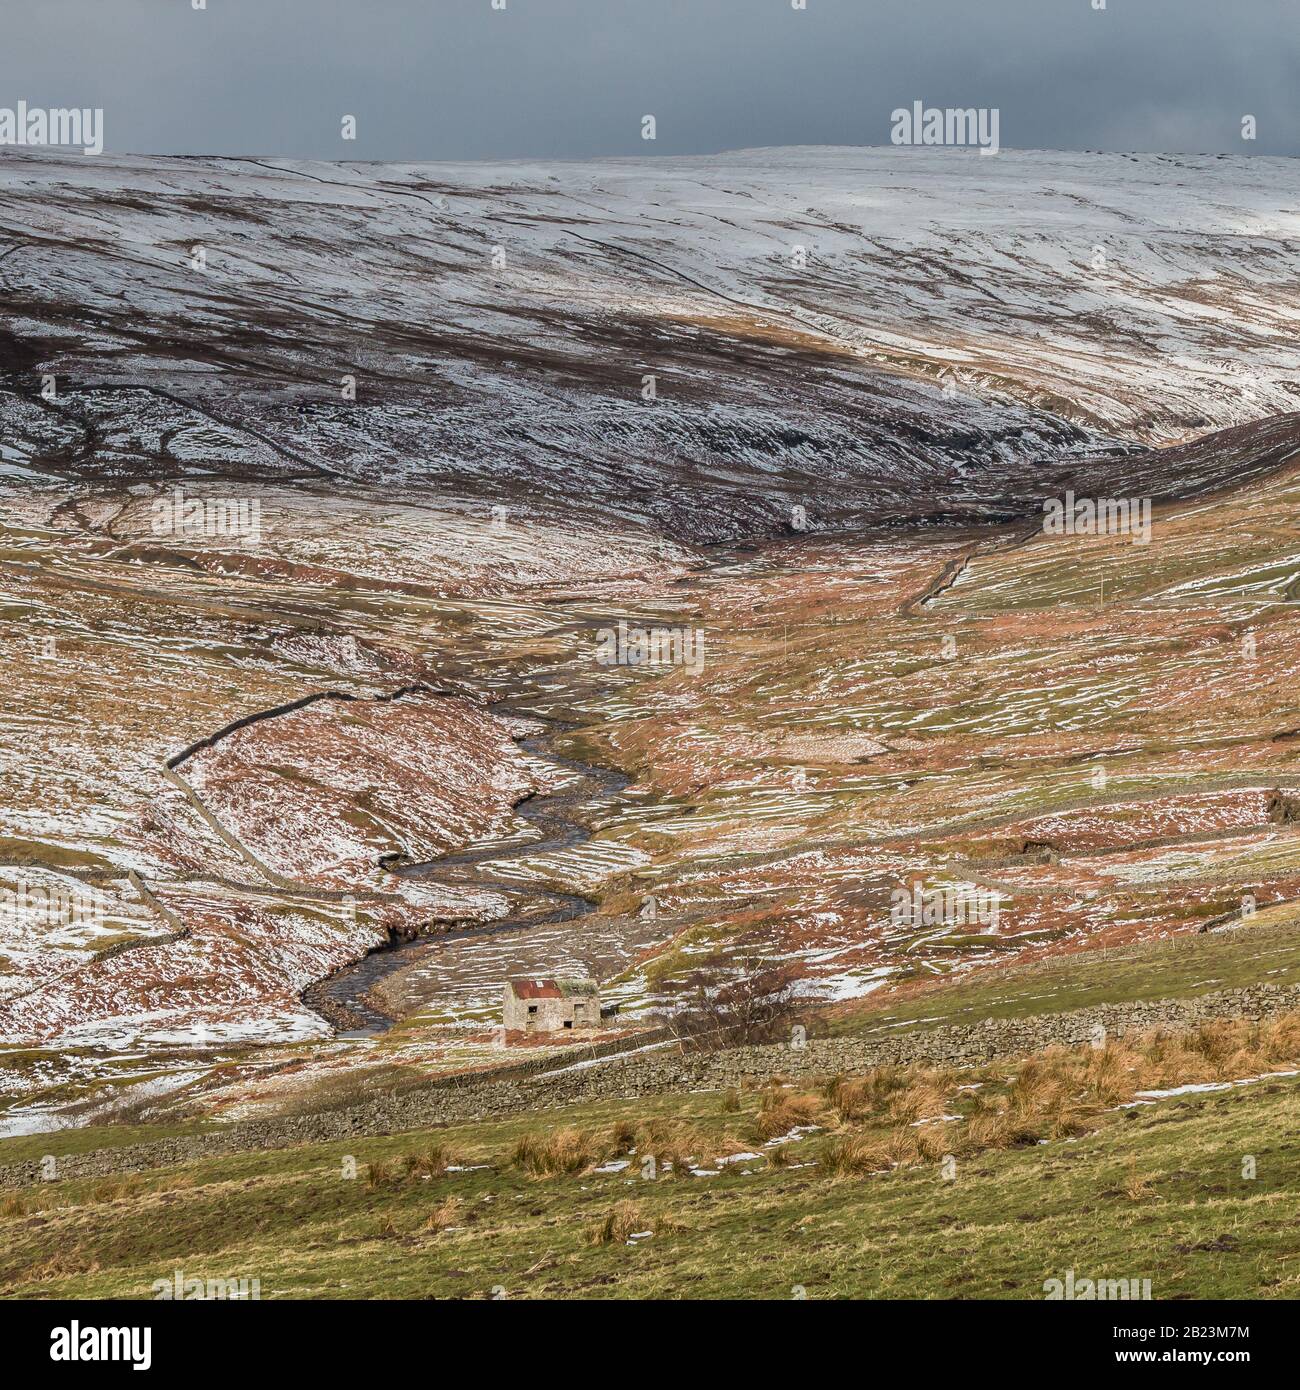 A wintry scene in the Hudes Hope, high in the North Pennines AONB near Middleton in Teesdale. Stock Photo